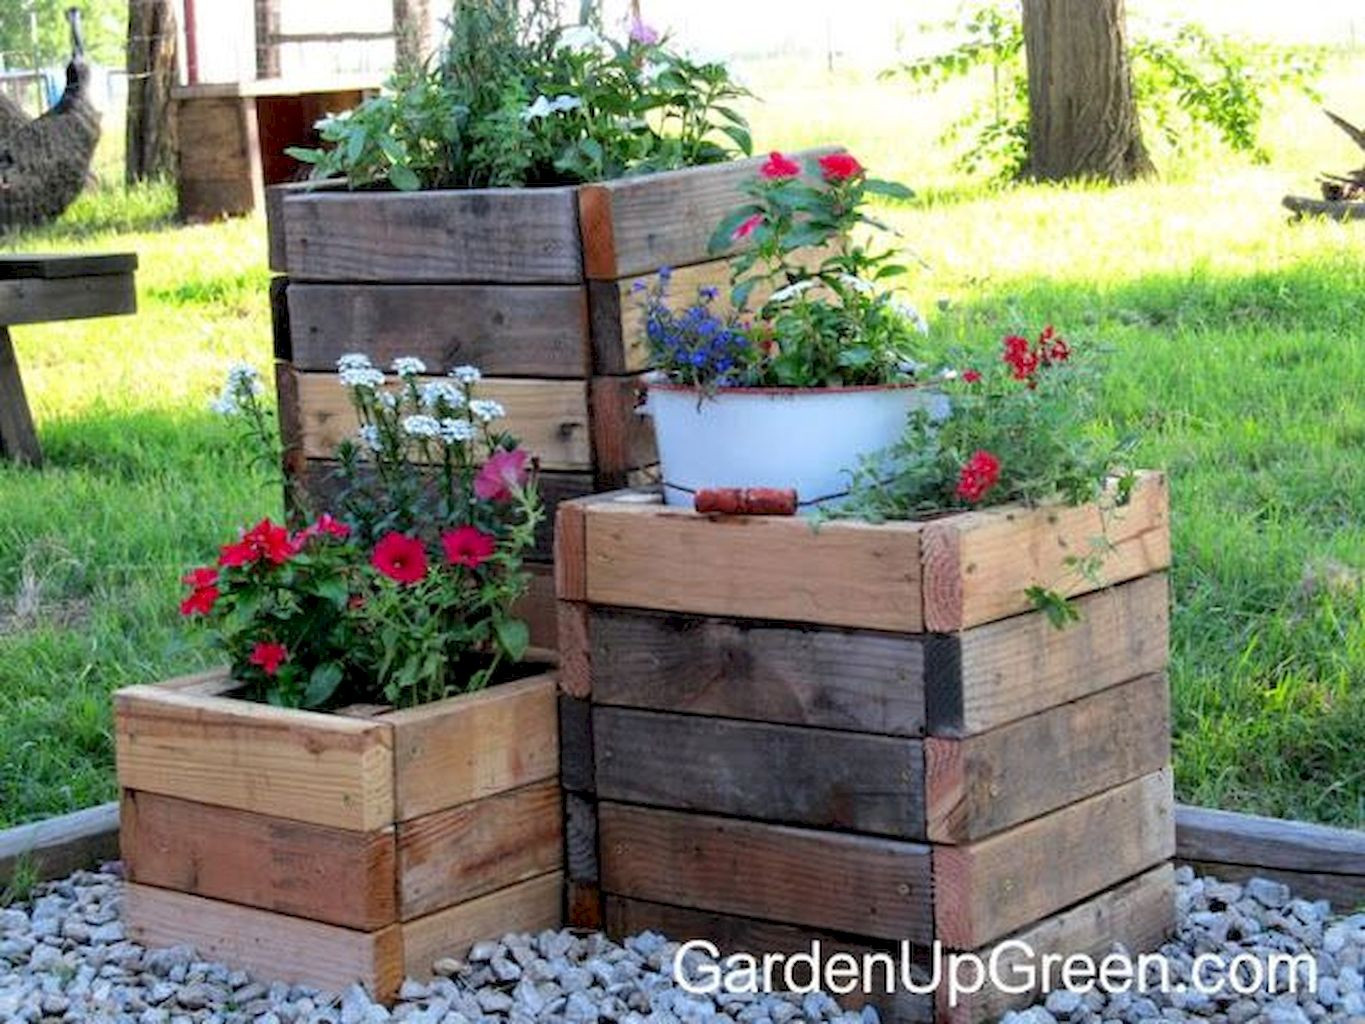 DIY Wood Flower Boxes
 Creative Homemade Planter Boxes from Pallets Simple DIY